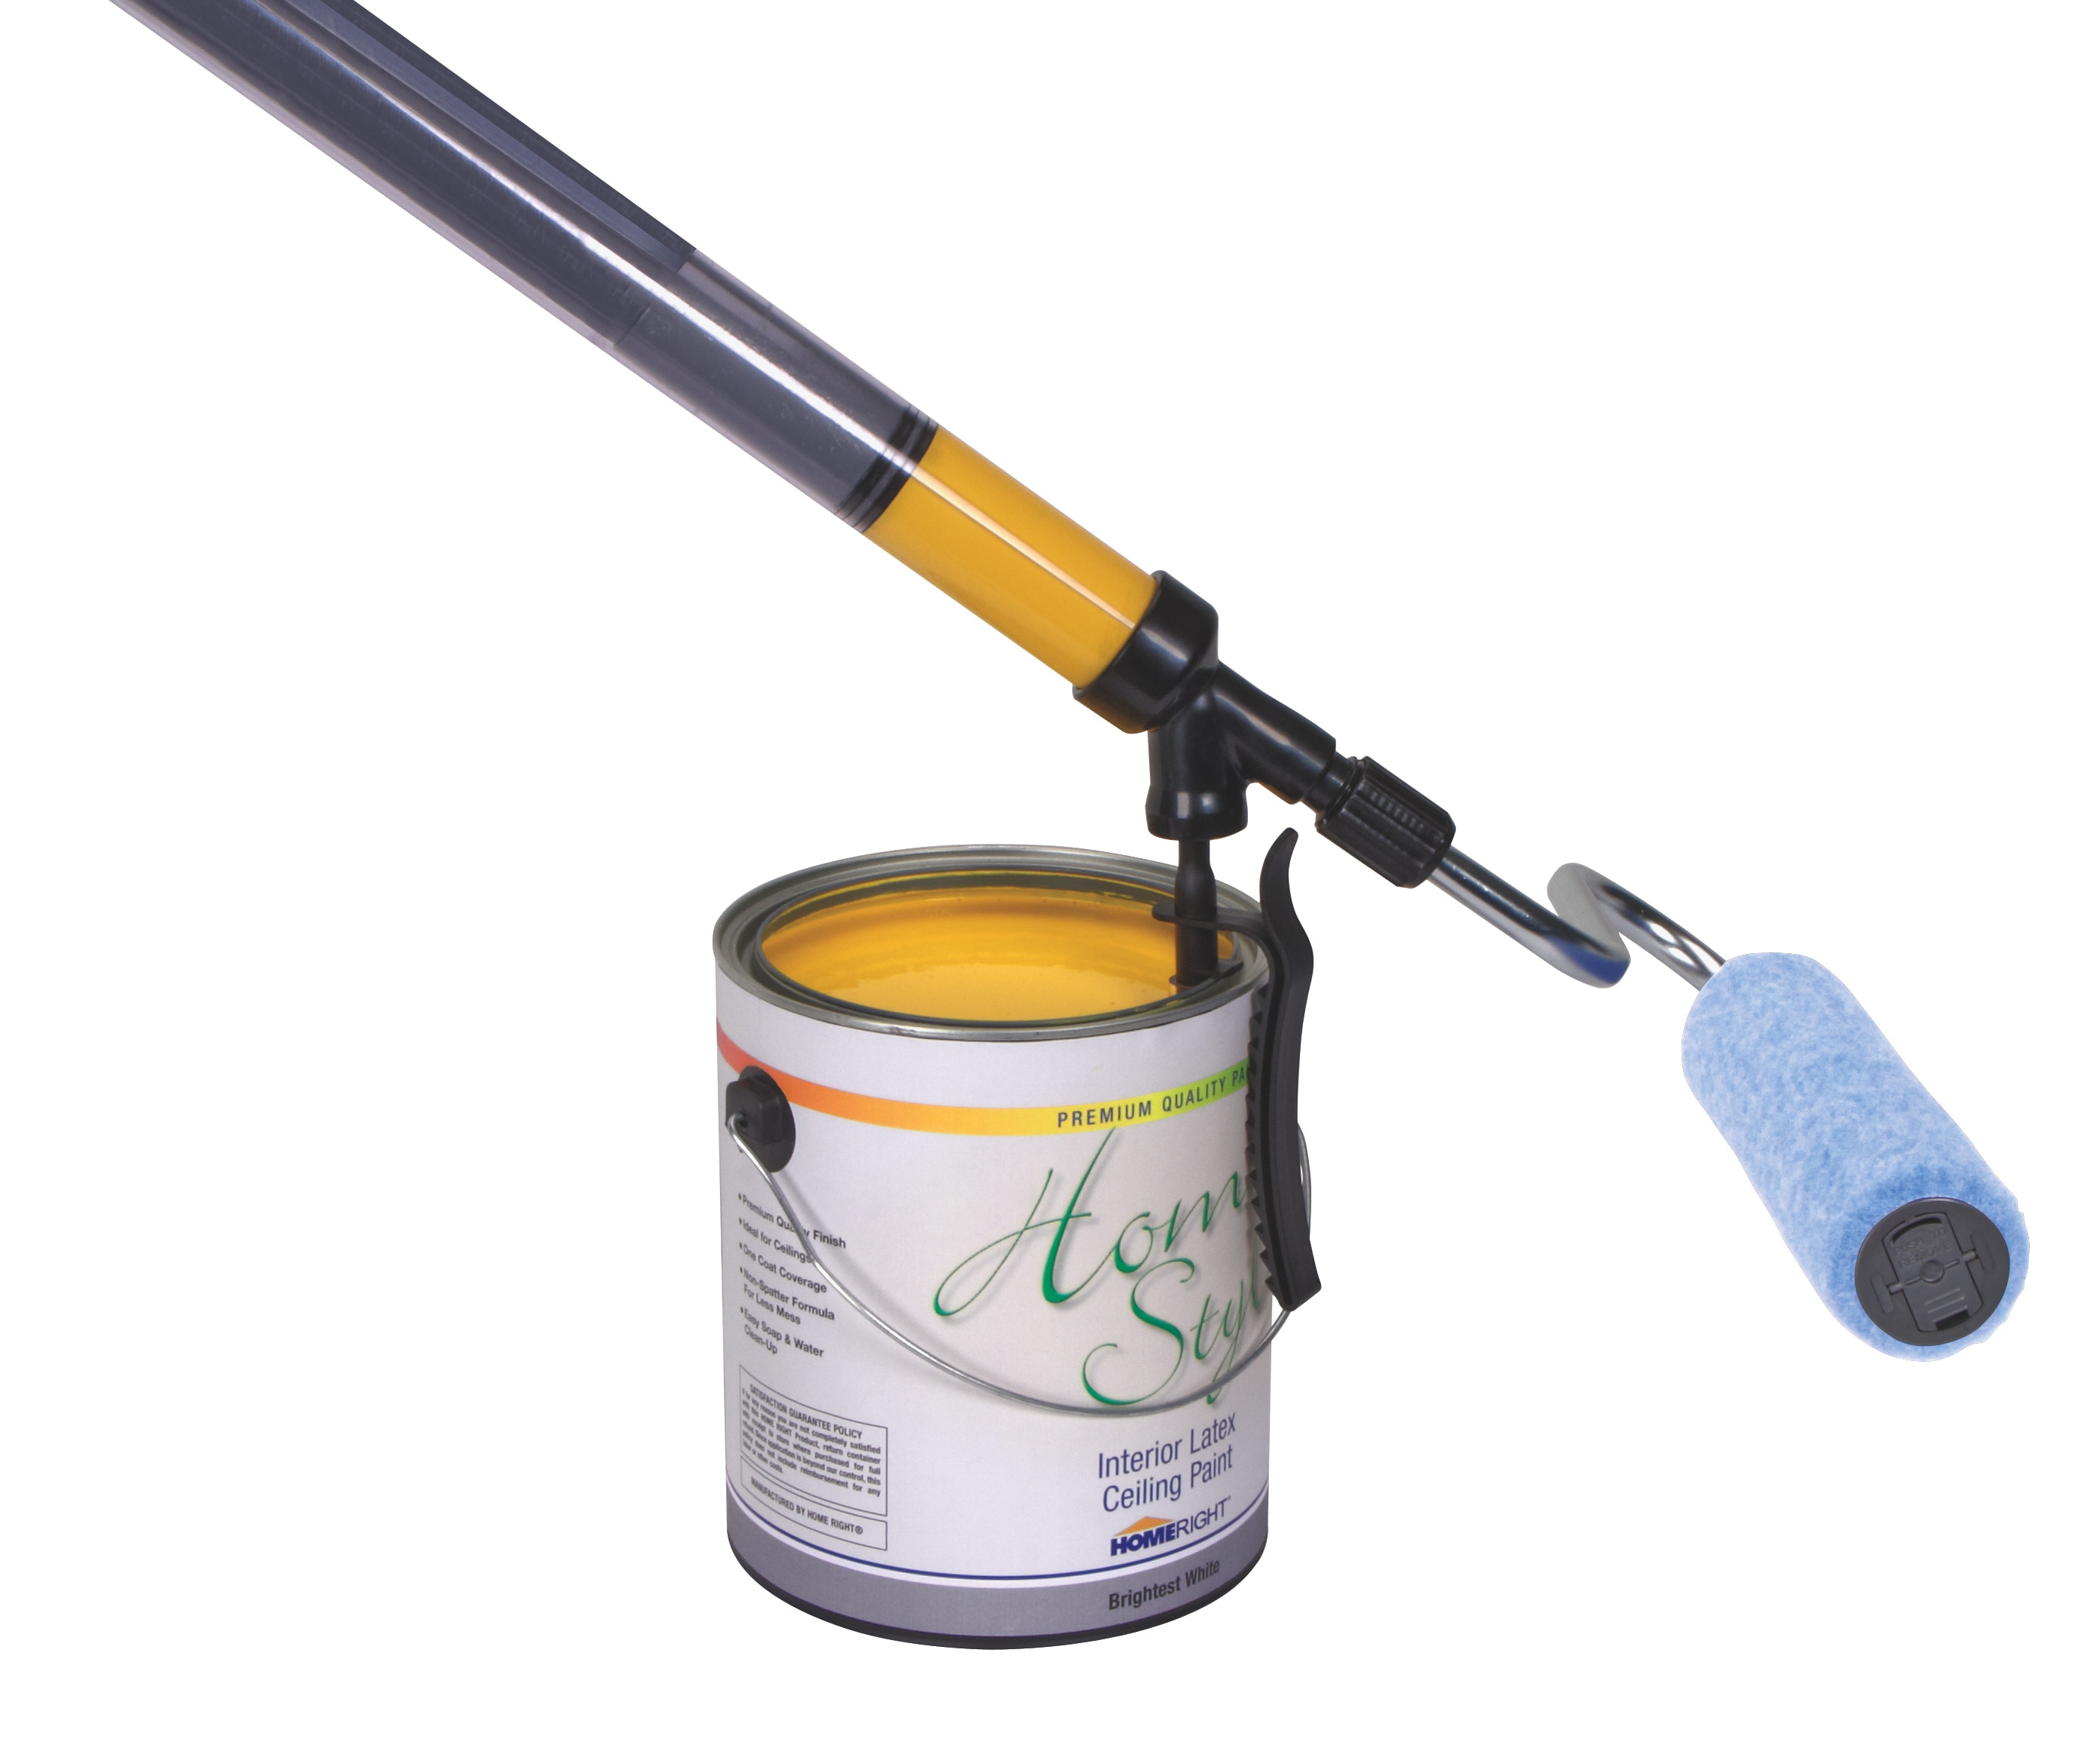 Wagner EZ-Twist 45-in Inner-Fed Paint Roller at